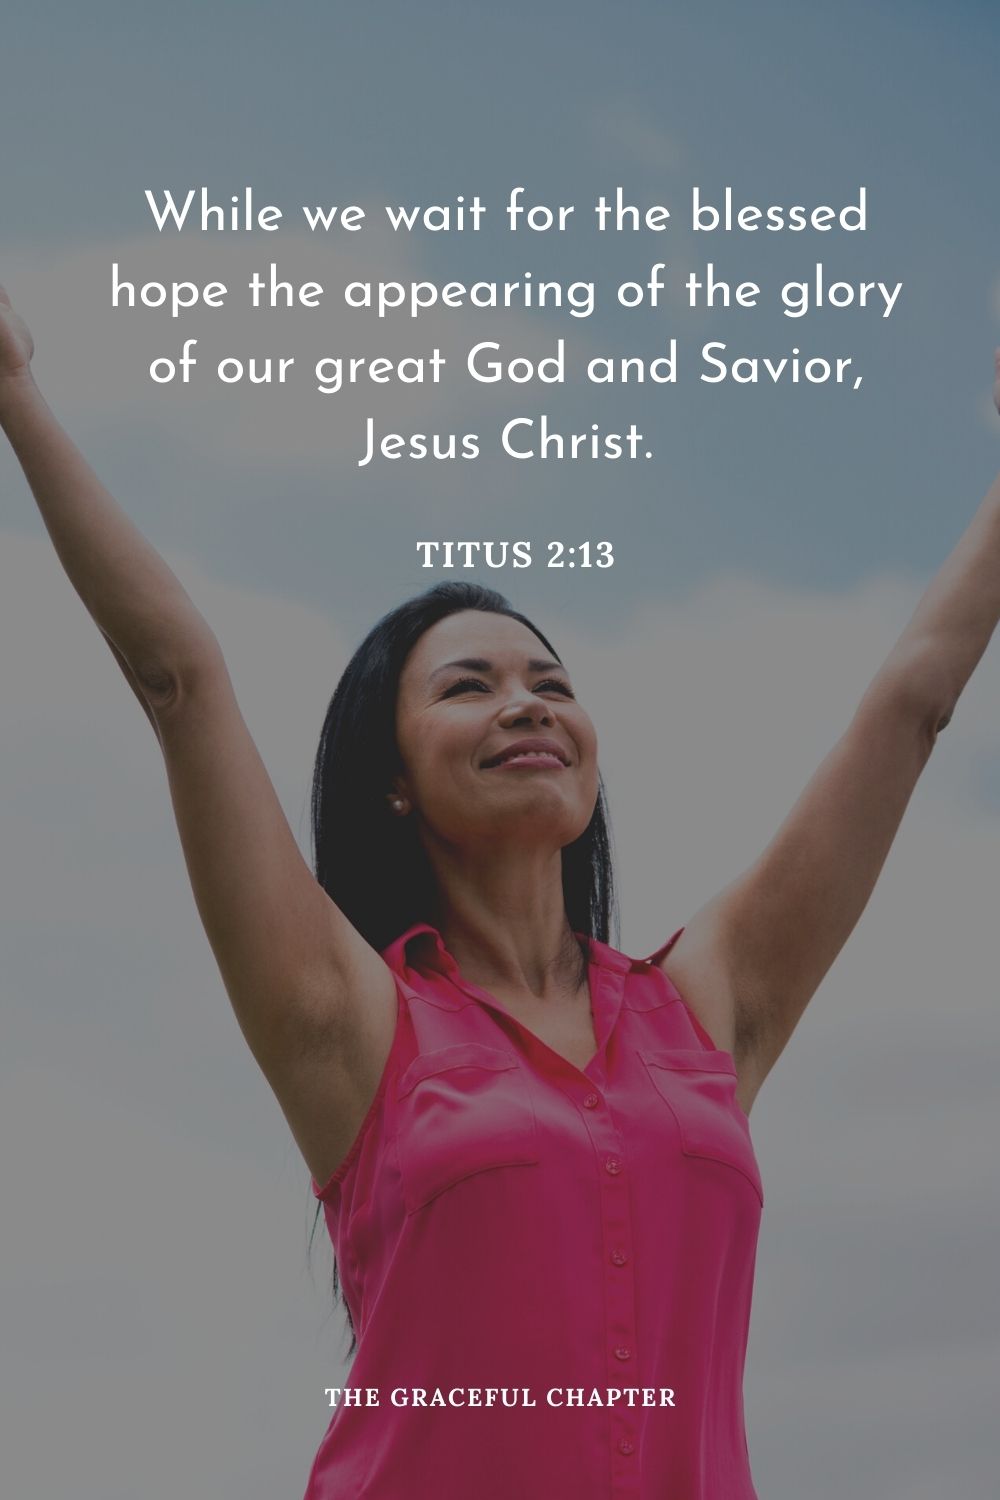 While we wait for the blessed hope the appearing of the glory of our great God and Savior, Jesus Christ.